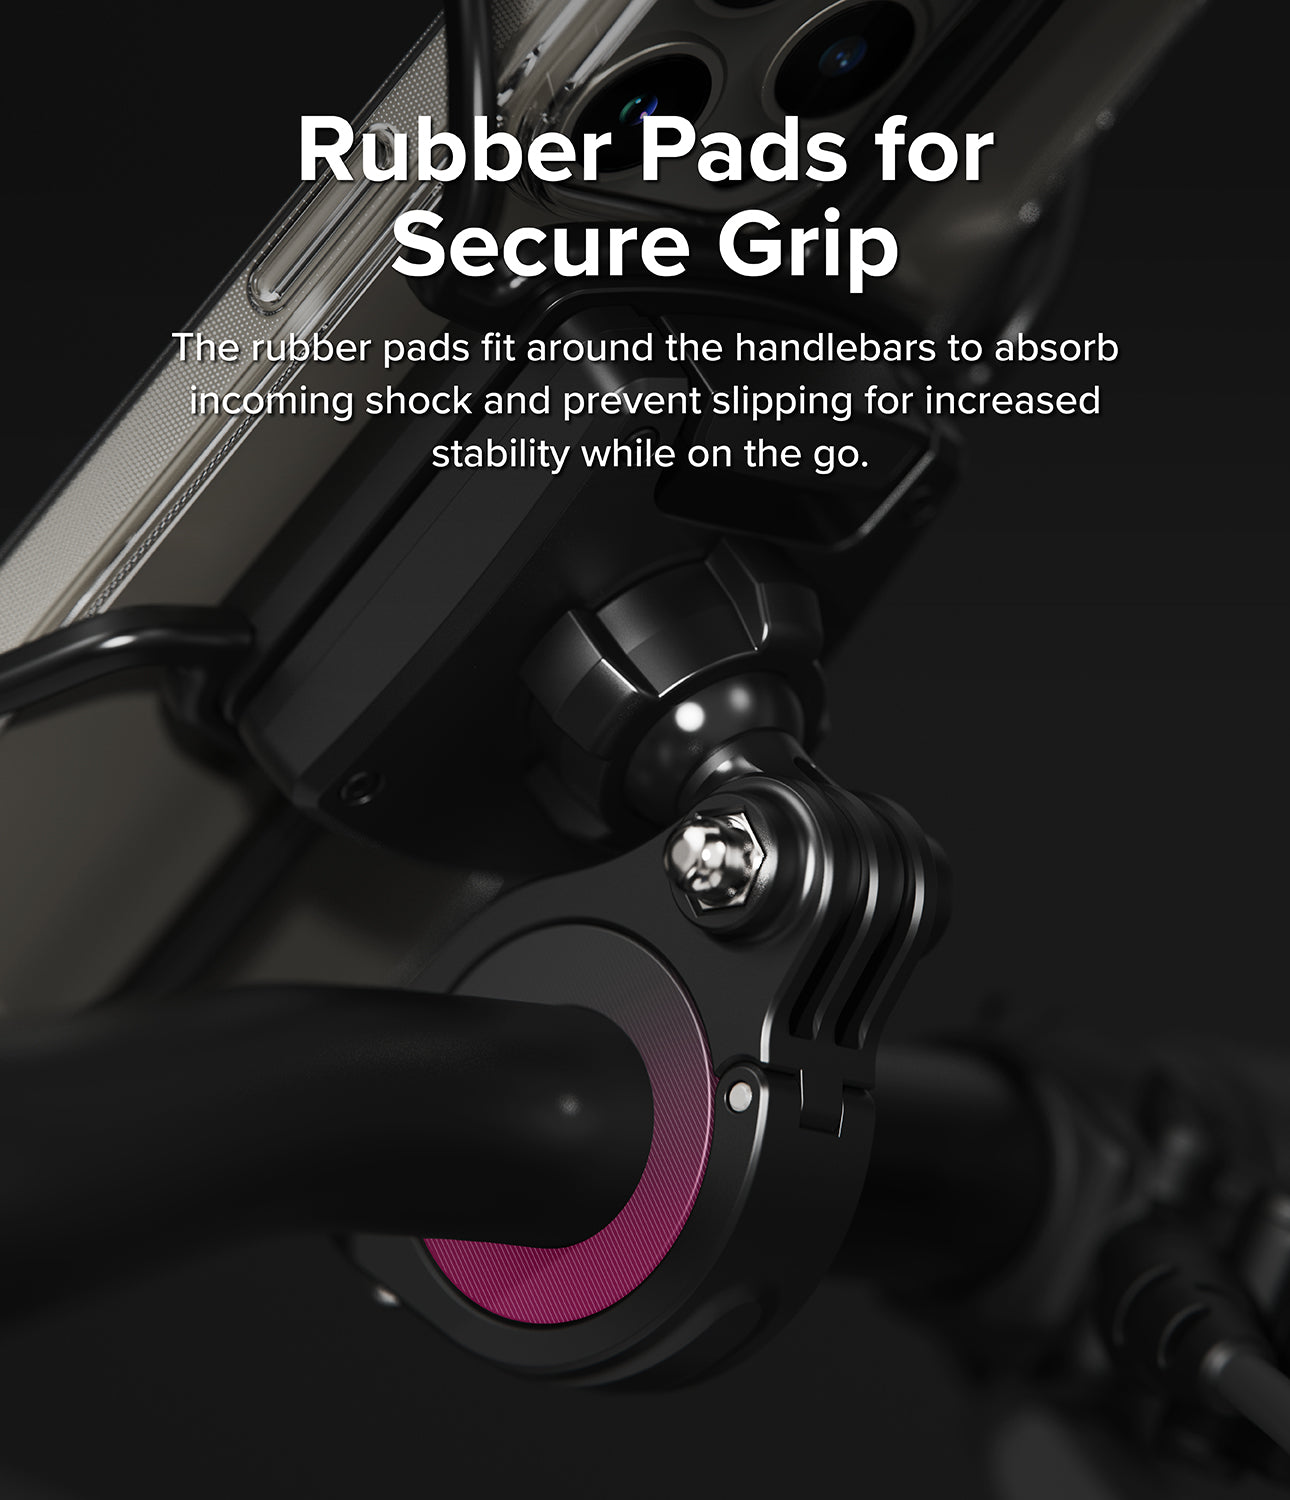 Quick & Go | Grip Bike Mount - Rubber Pads for Secure Grip. The rubber pads fit around the handlebars to absorb incoming shock and prevent slipping for increased stability while on the go.